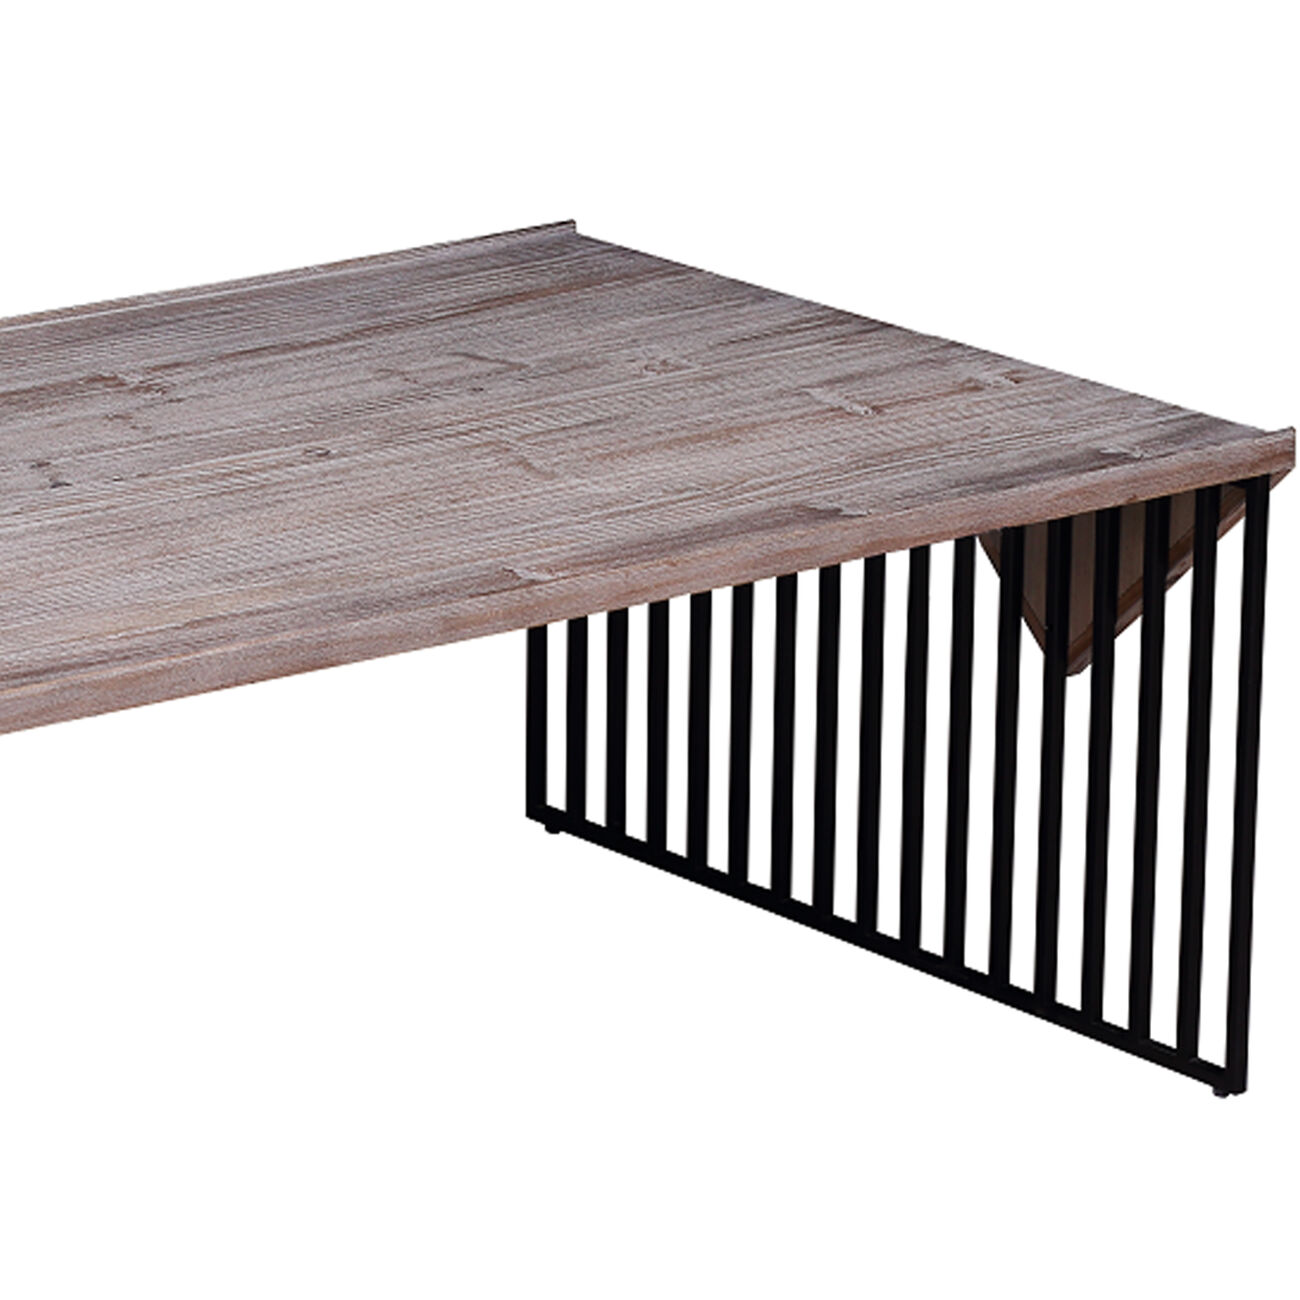 Rectangular Wooden Coffee Table with Sled Wire Base, Gray and Black